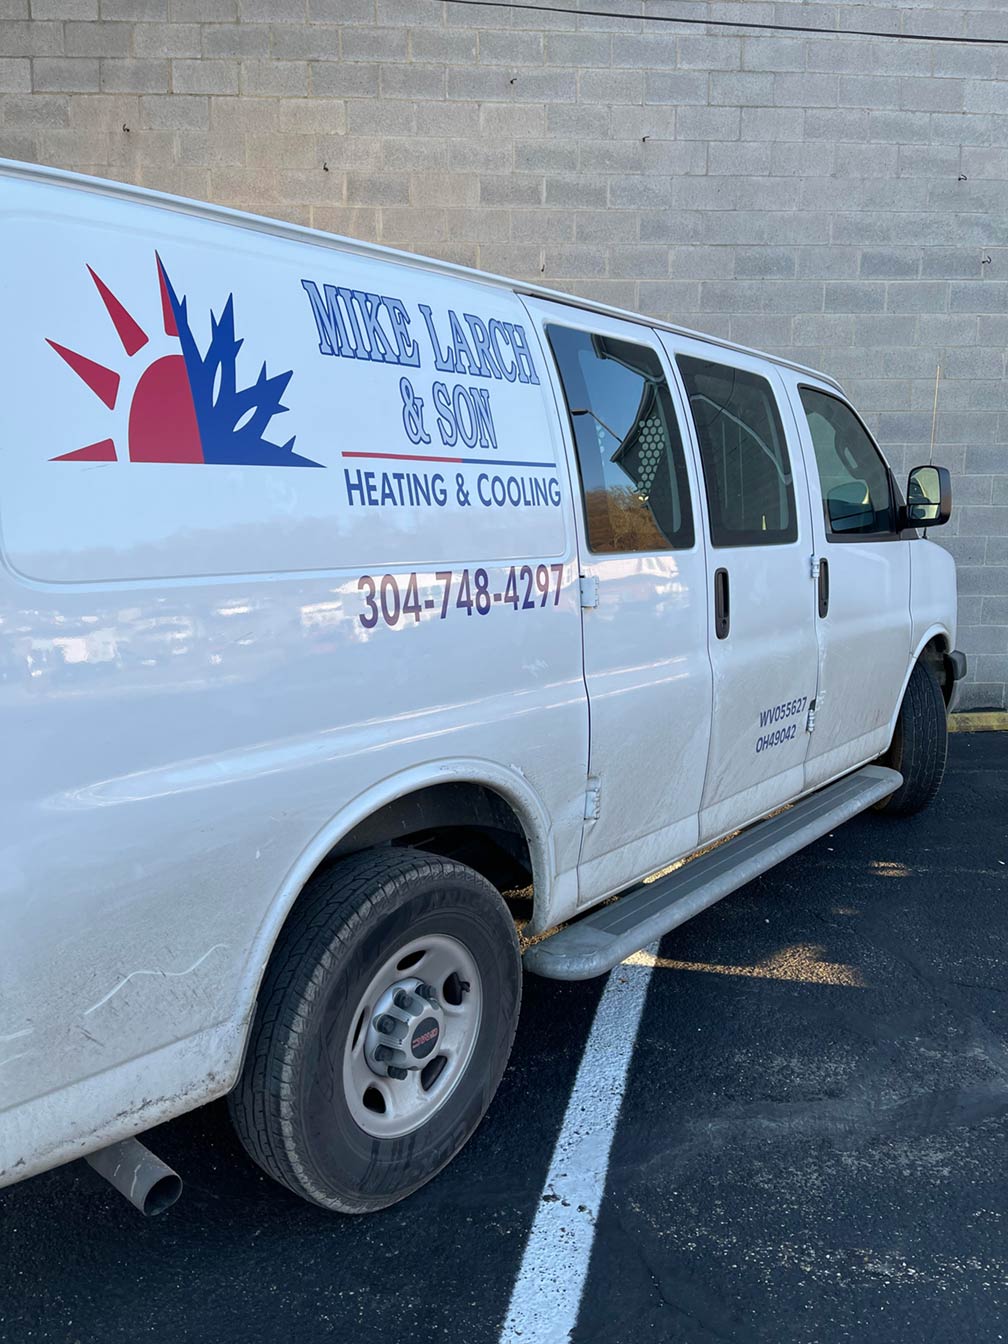 Heating & Cooling Contractors in Weirton, WV